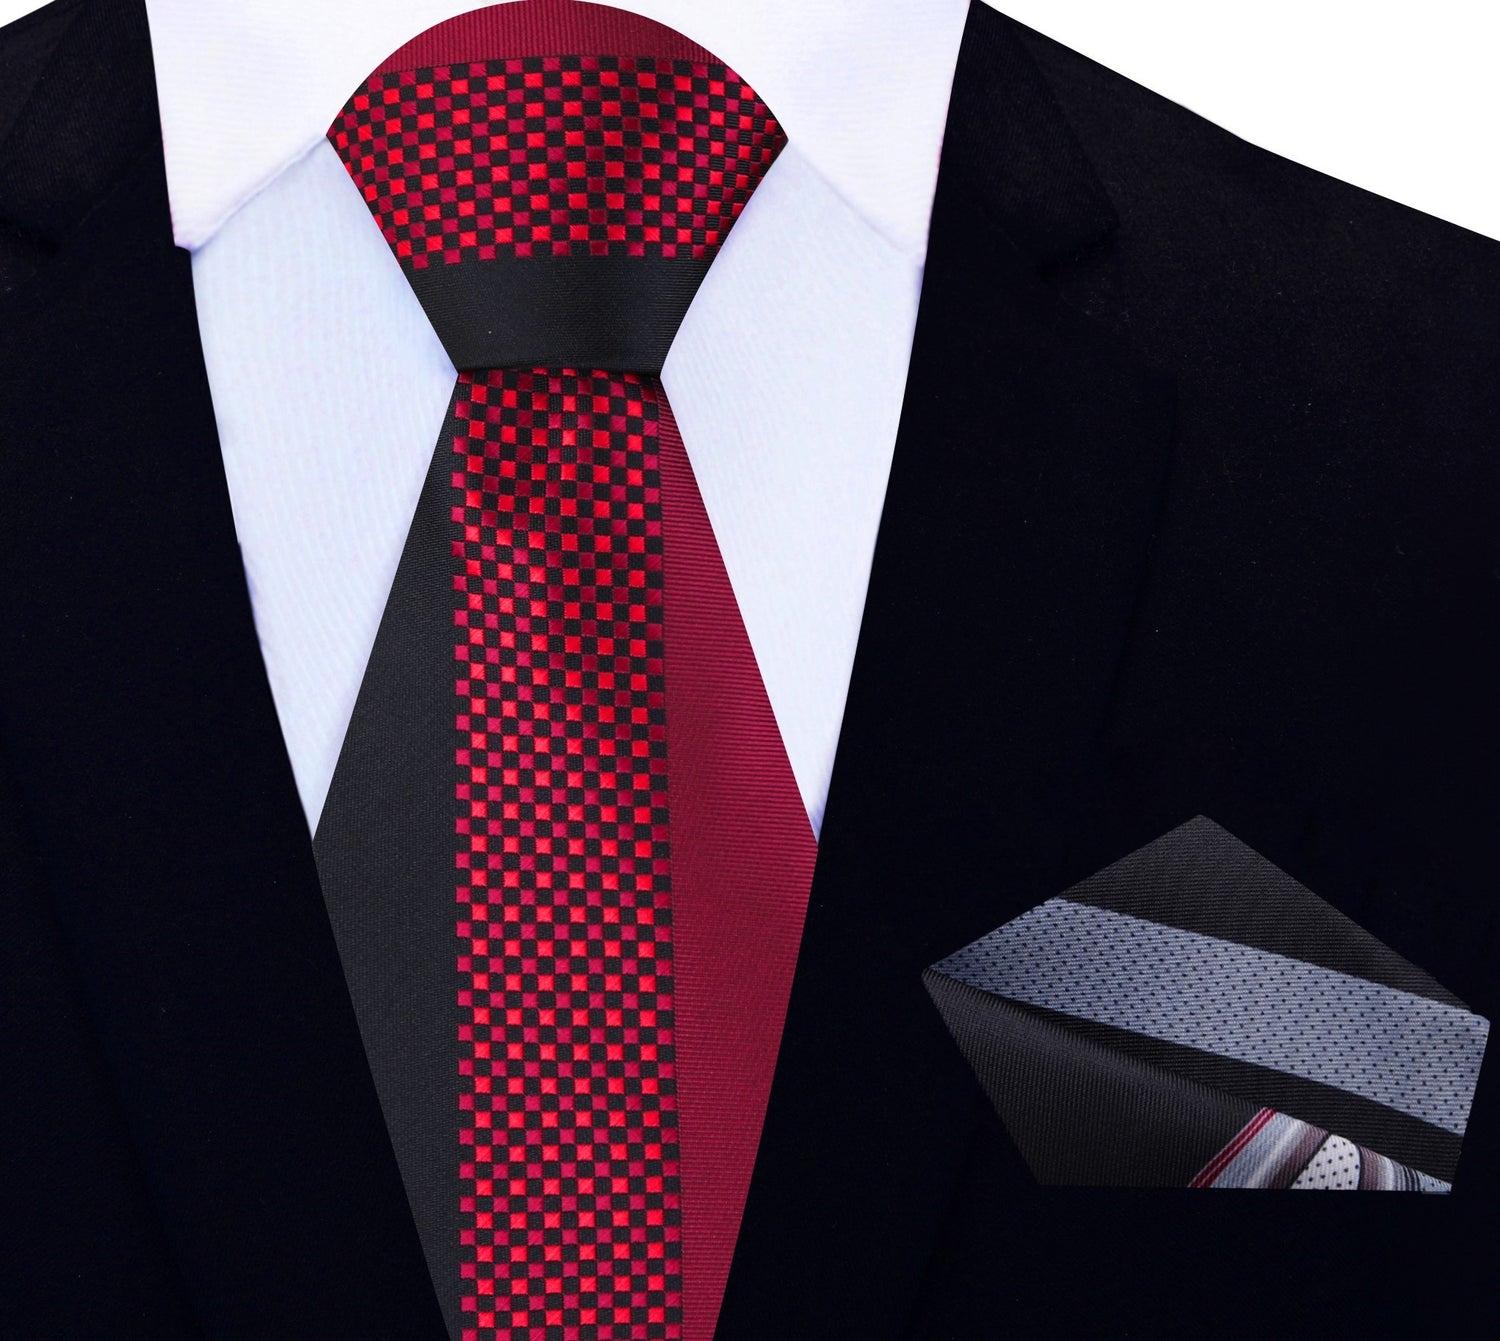 View 2: Red & Black Check Necktie with Accenting Grey, Black and Red Square